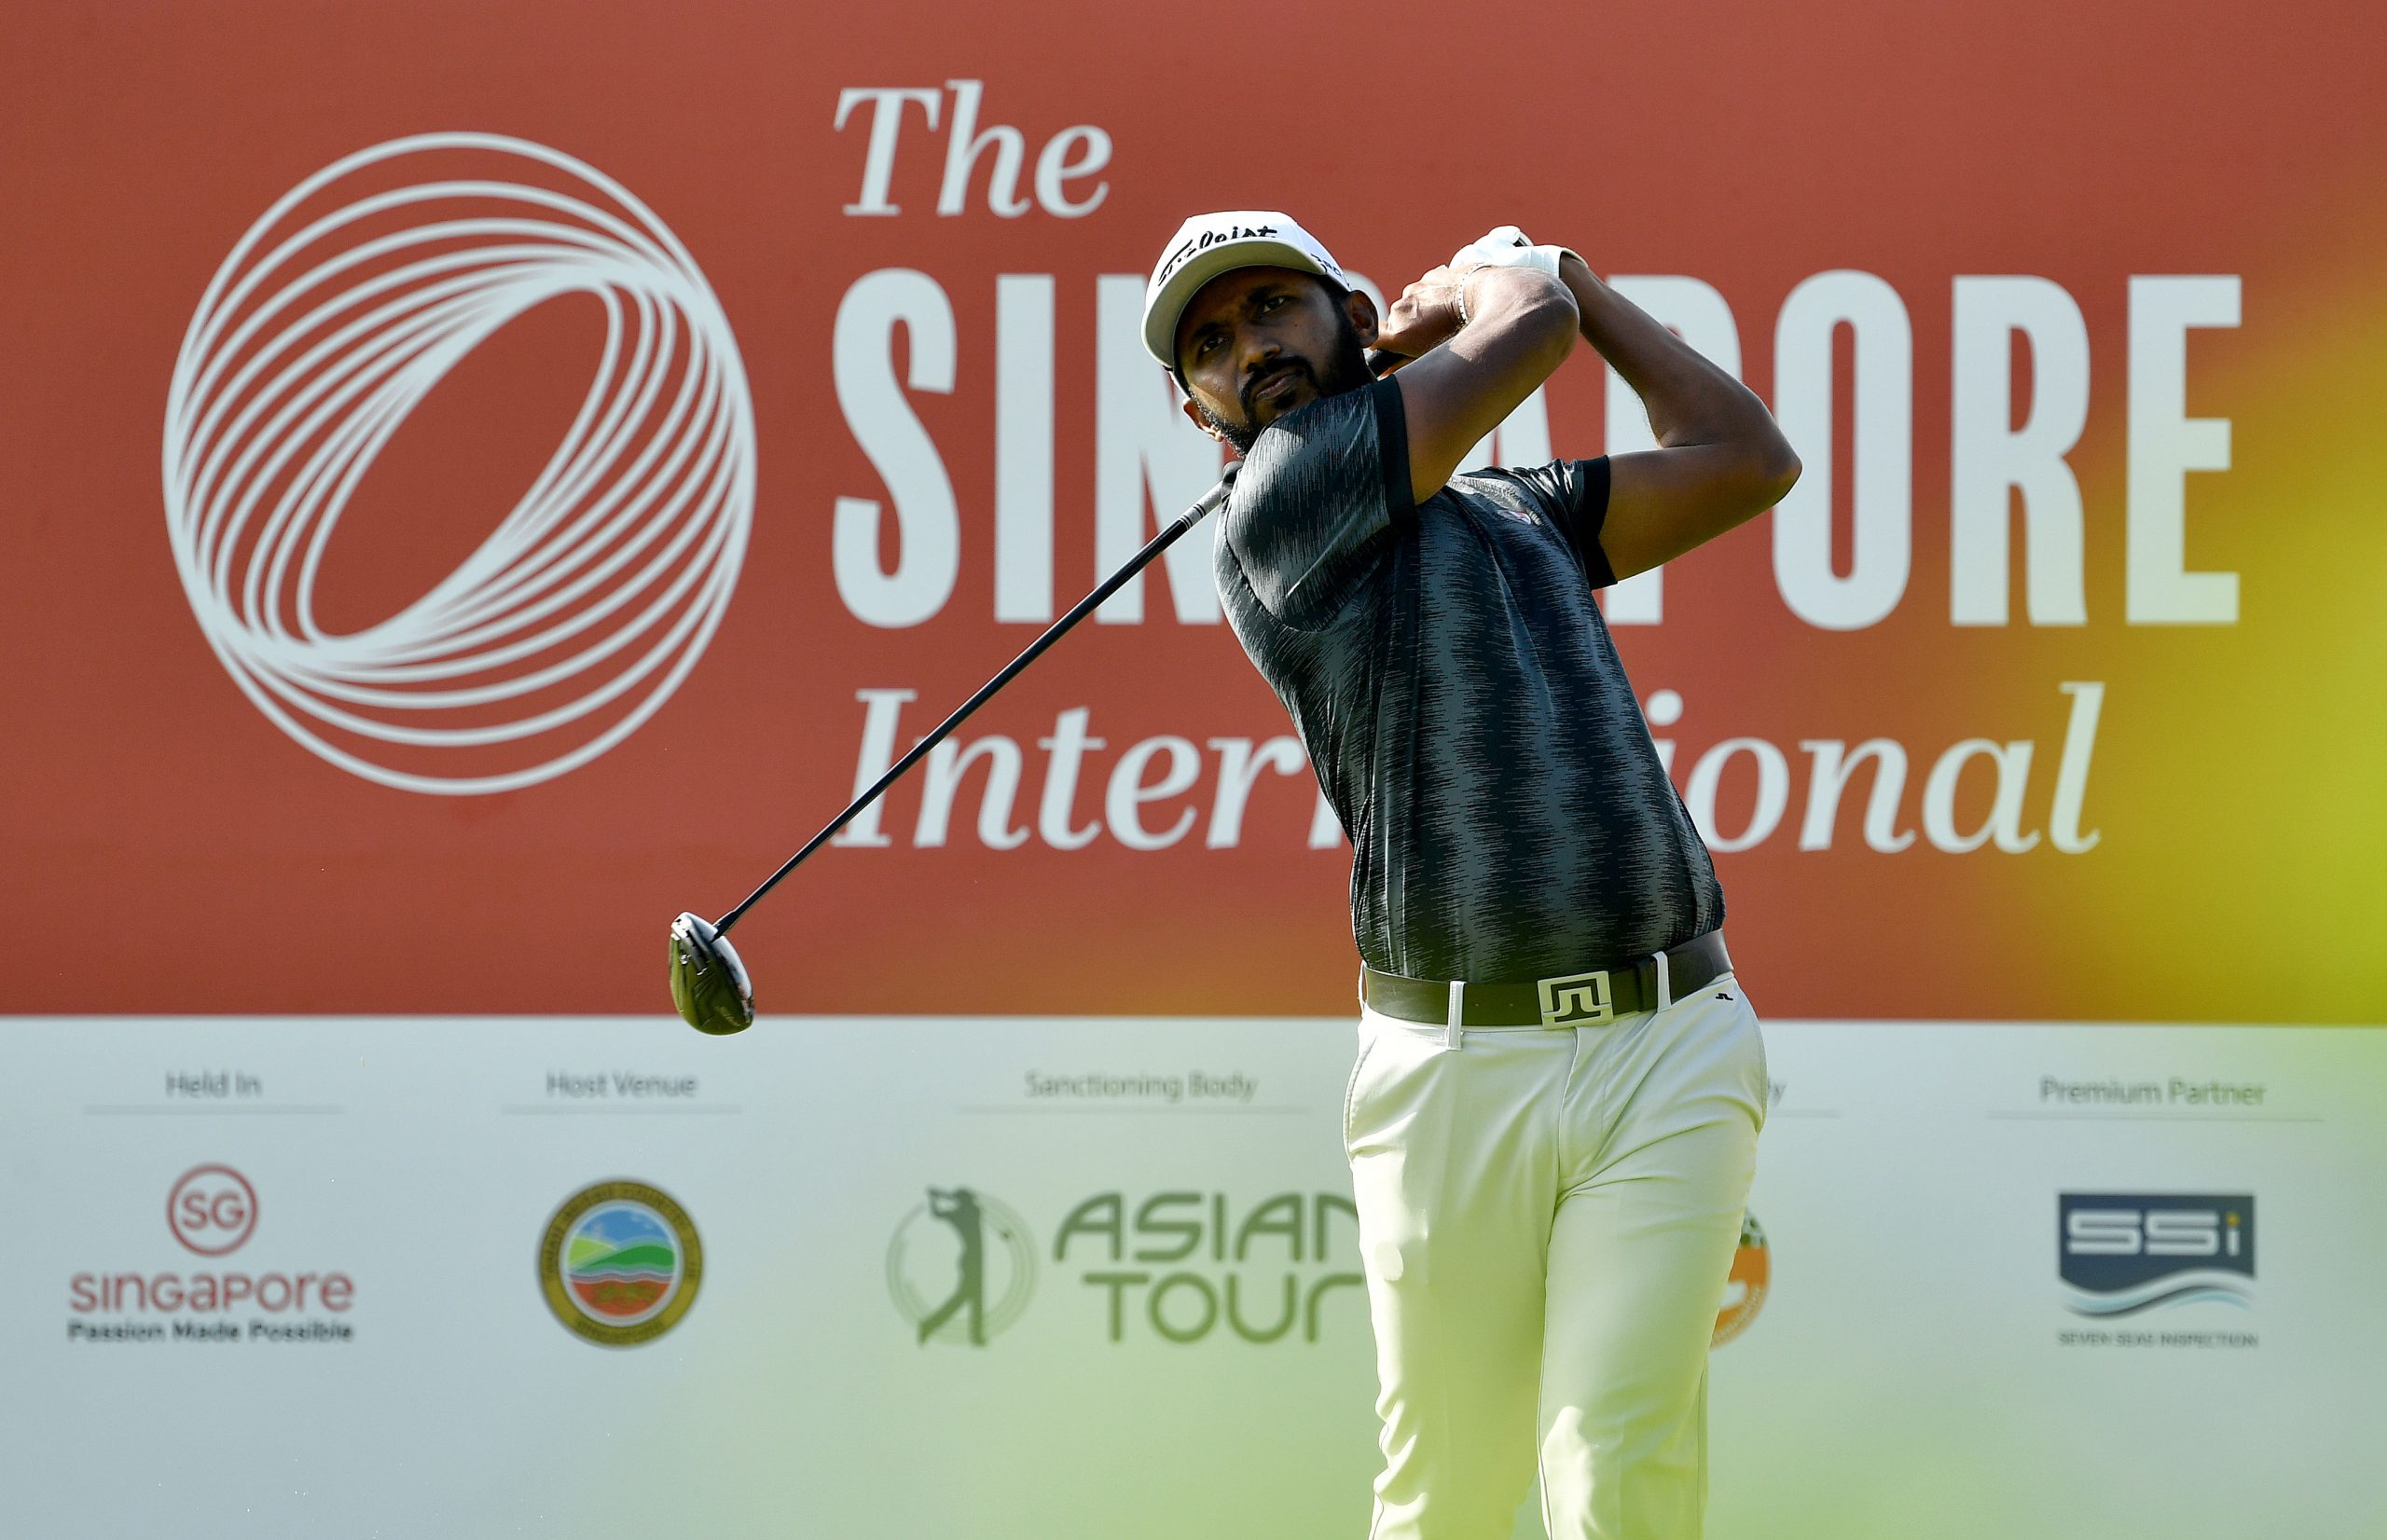 Chikka, Joshi in Top-5, stay in contention at Singapore International